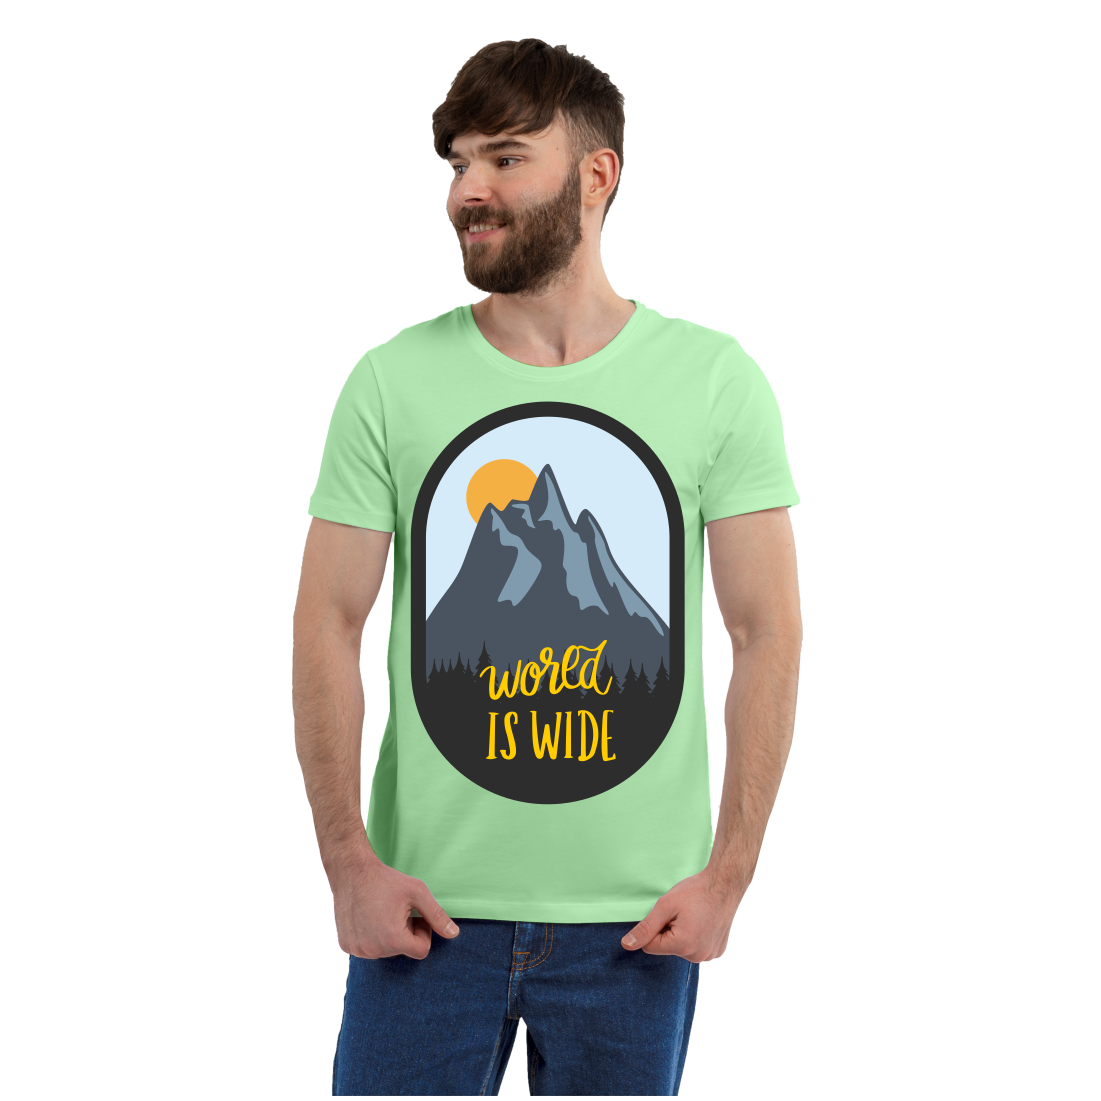 WORLD IS WIDE PRINTED T-SHIRTS